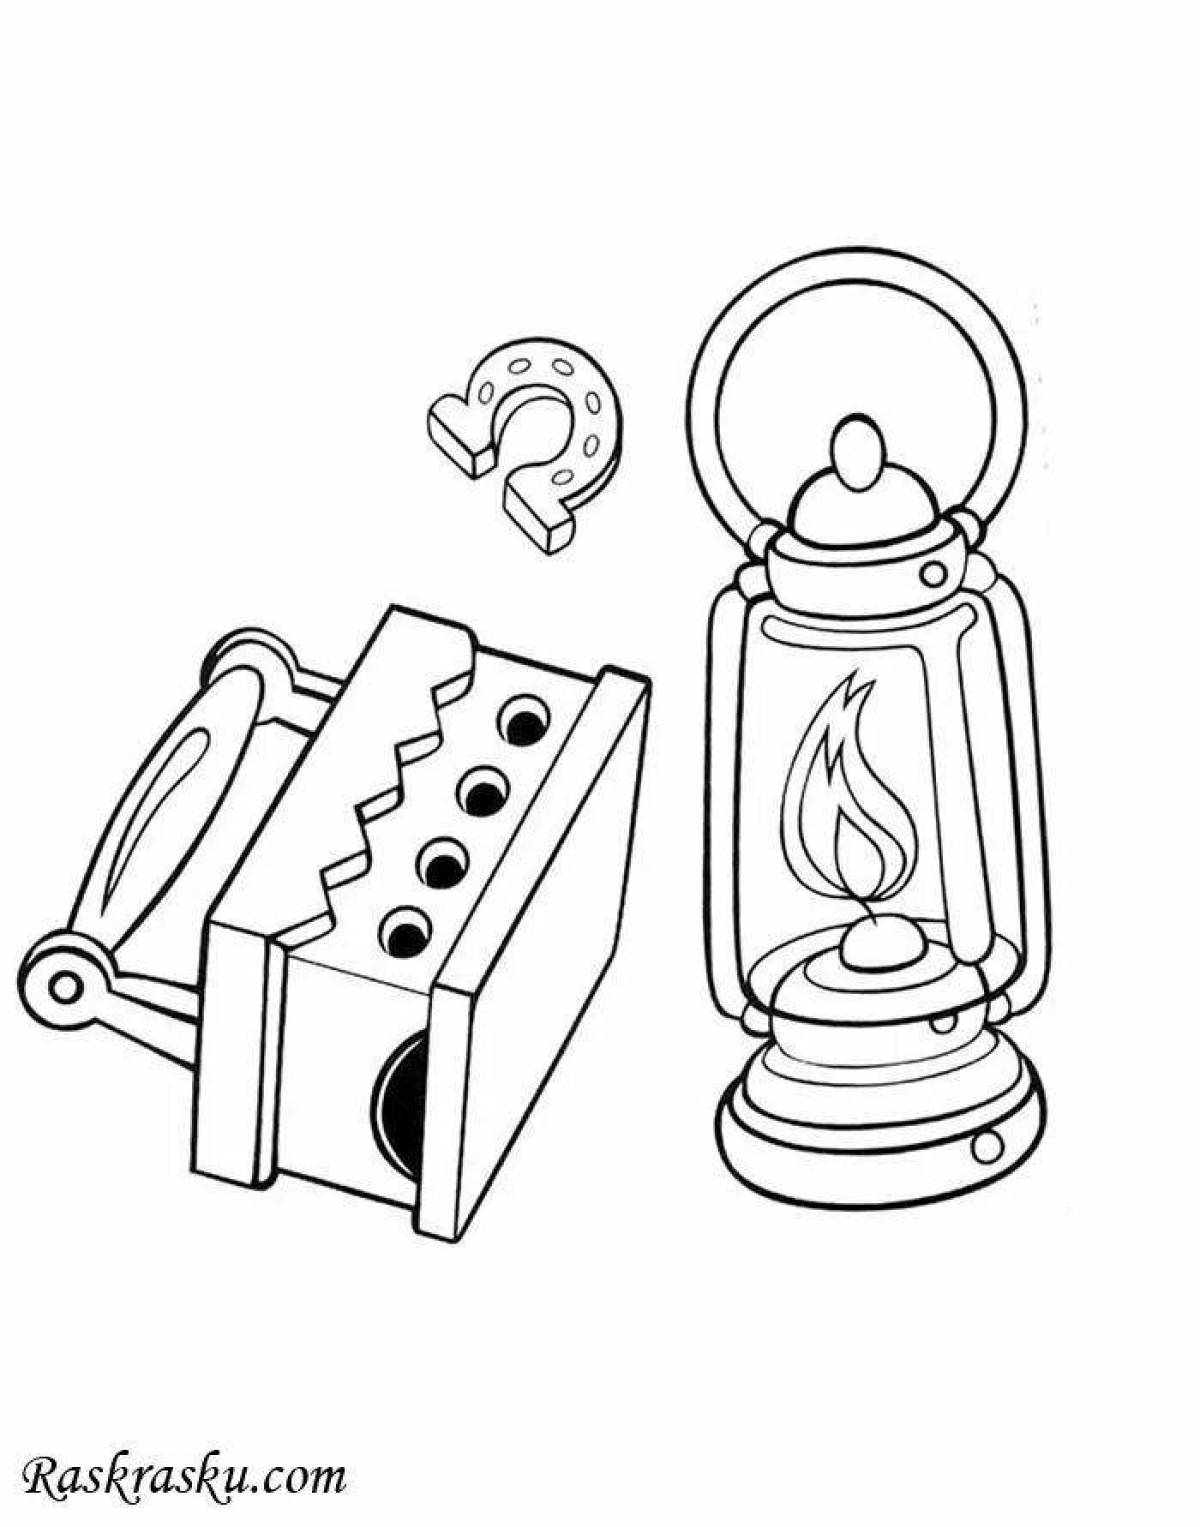 Fine tableware coloring page